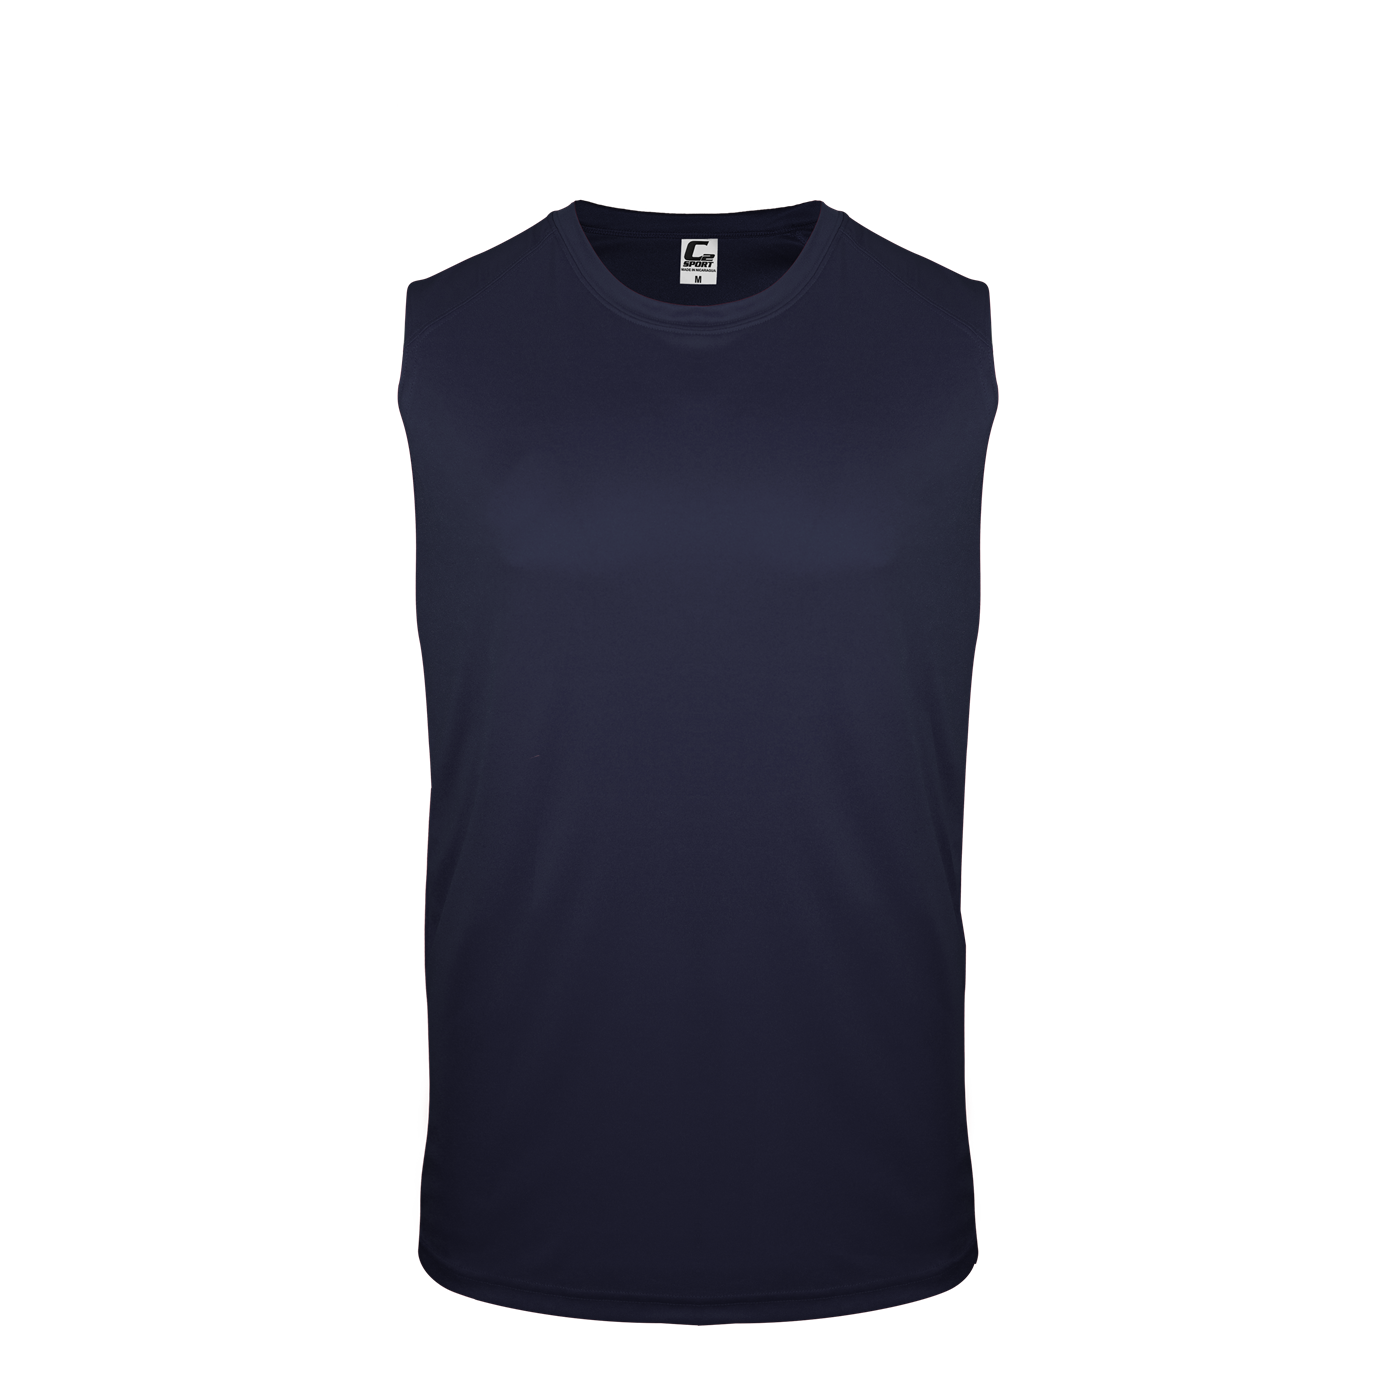 C2 Sleeveless Youth Tee | Badger Sport - Athletic Apparel